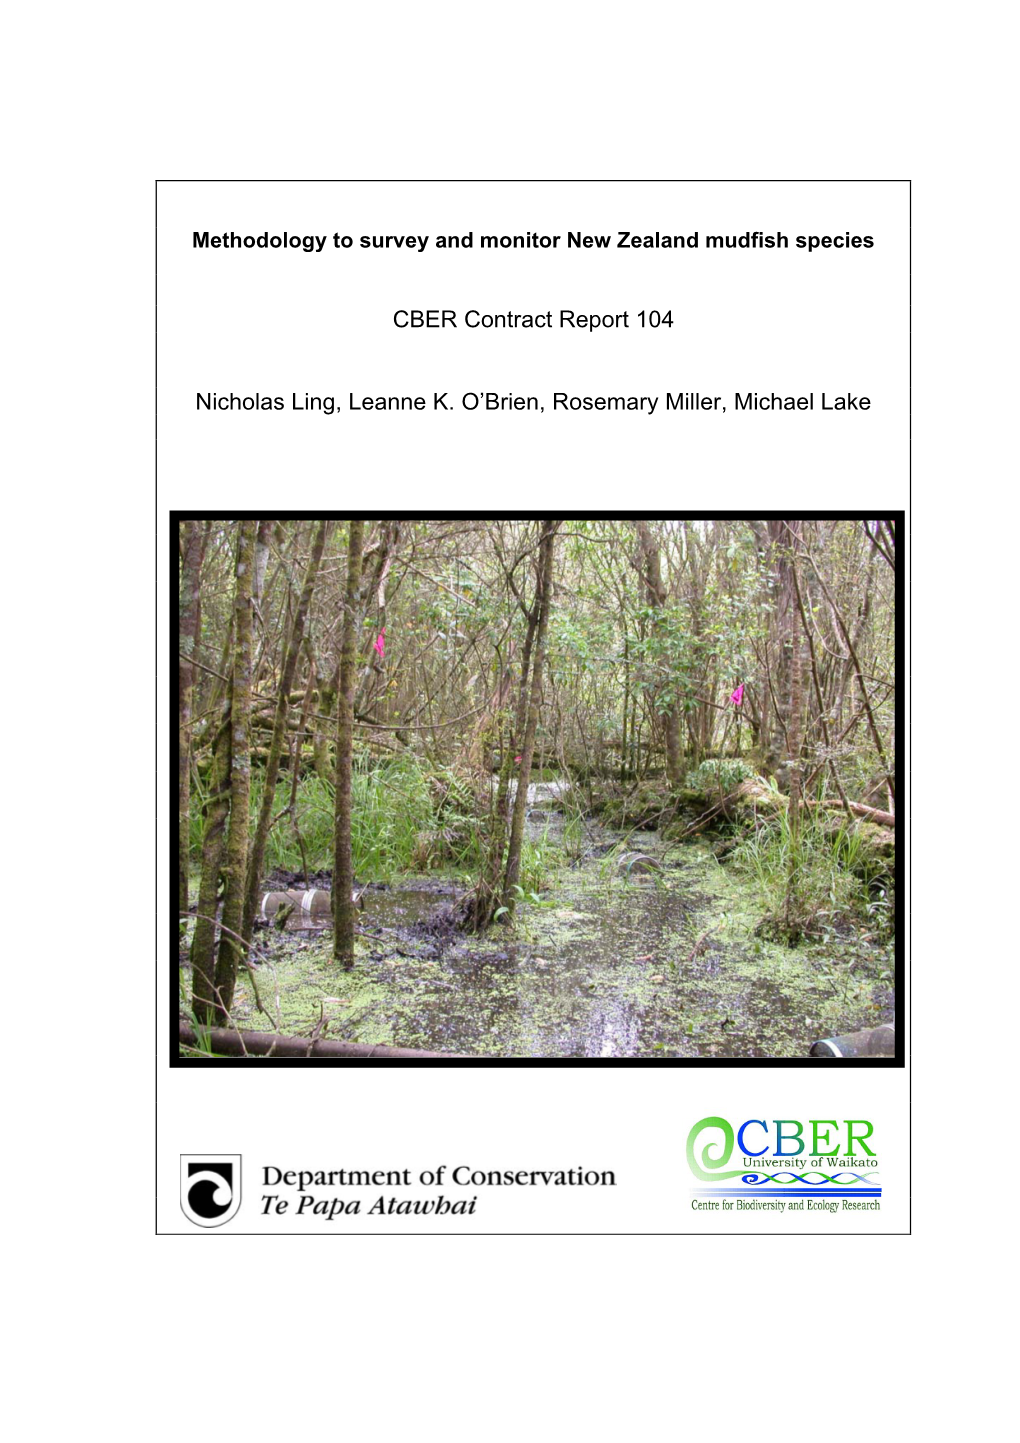 Methodology to Survey and Monitor New Zealand Mudfish Species